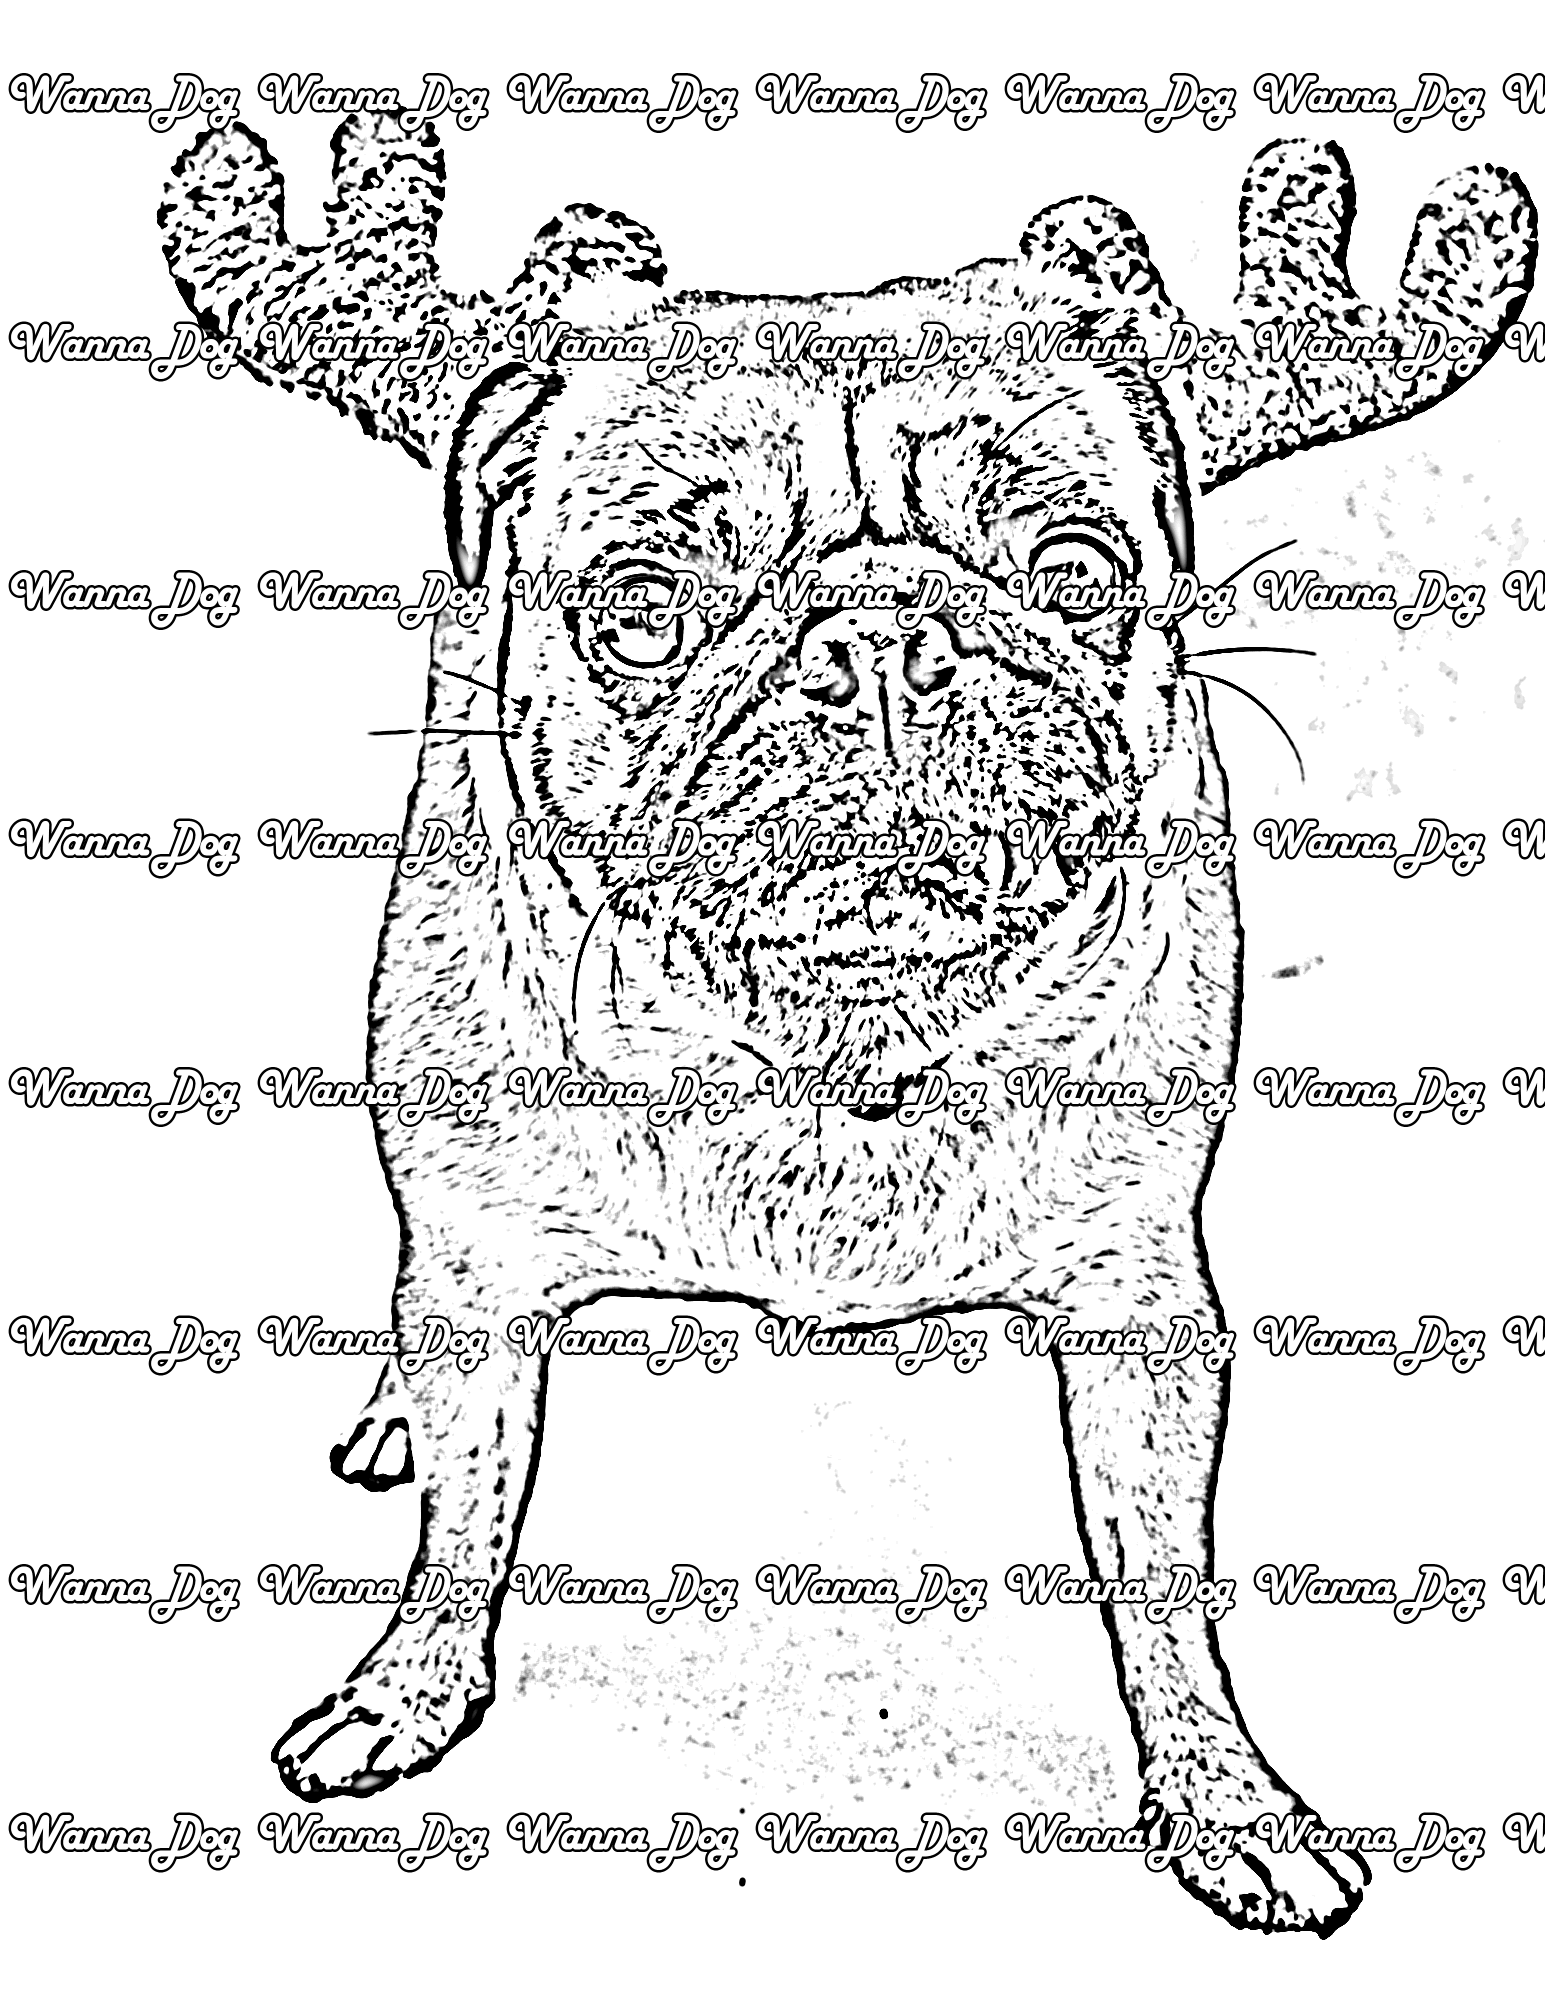 Pug Coloring Page of a dog with reindeer antlers